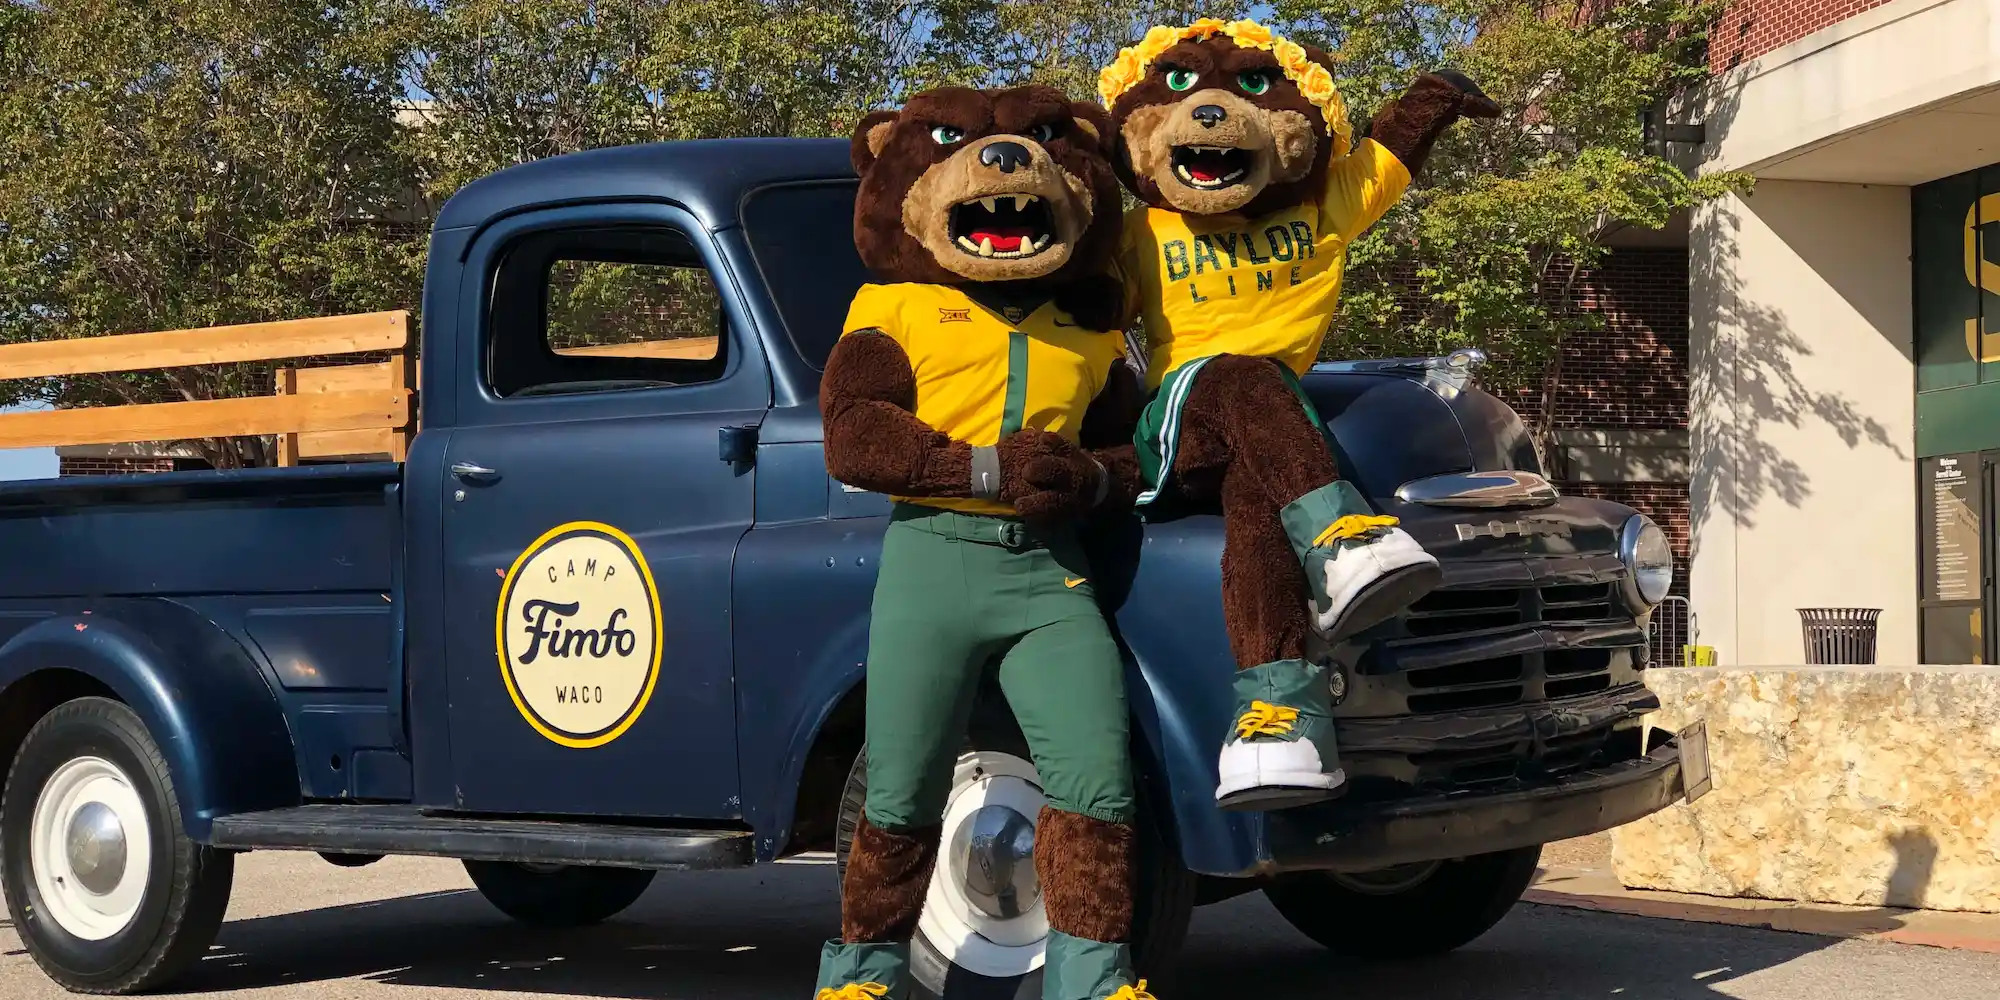 The Baylor University mascots, Merigold and Bruiser, posing in front of a Camp Fimfo Waco truck at a Baylor Football tailgate